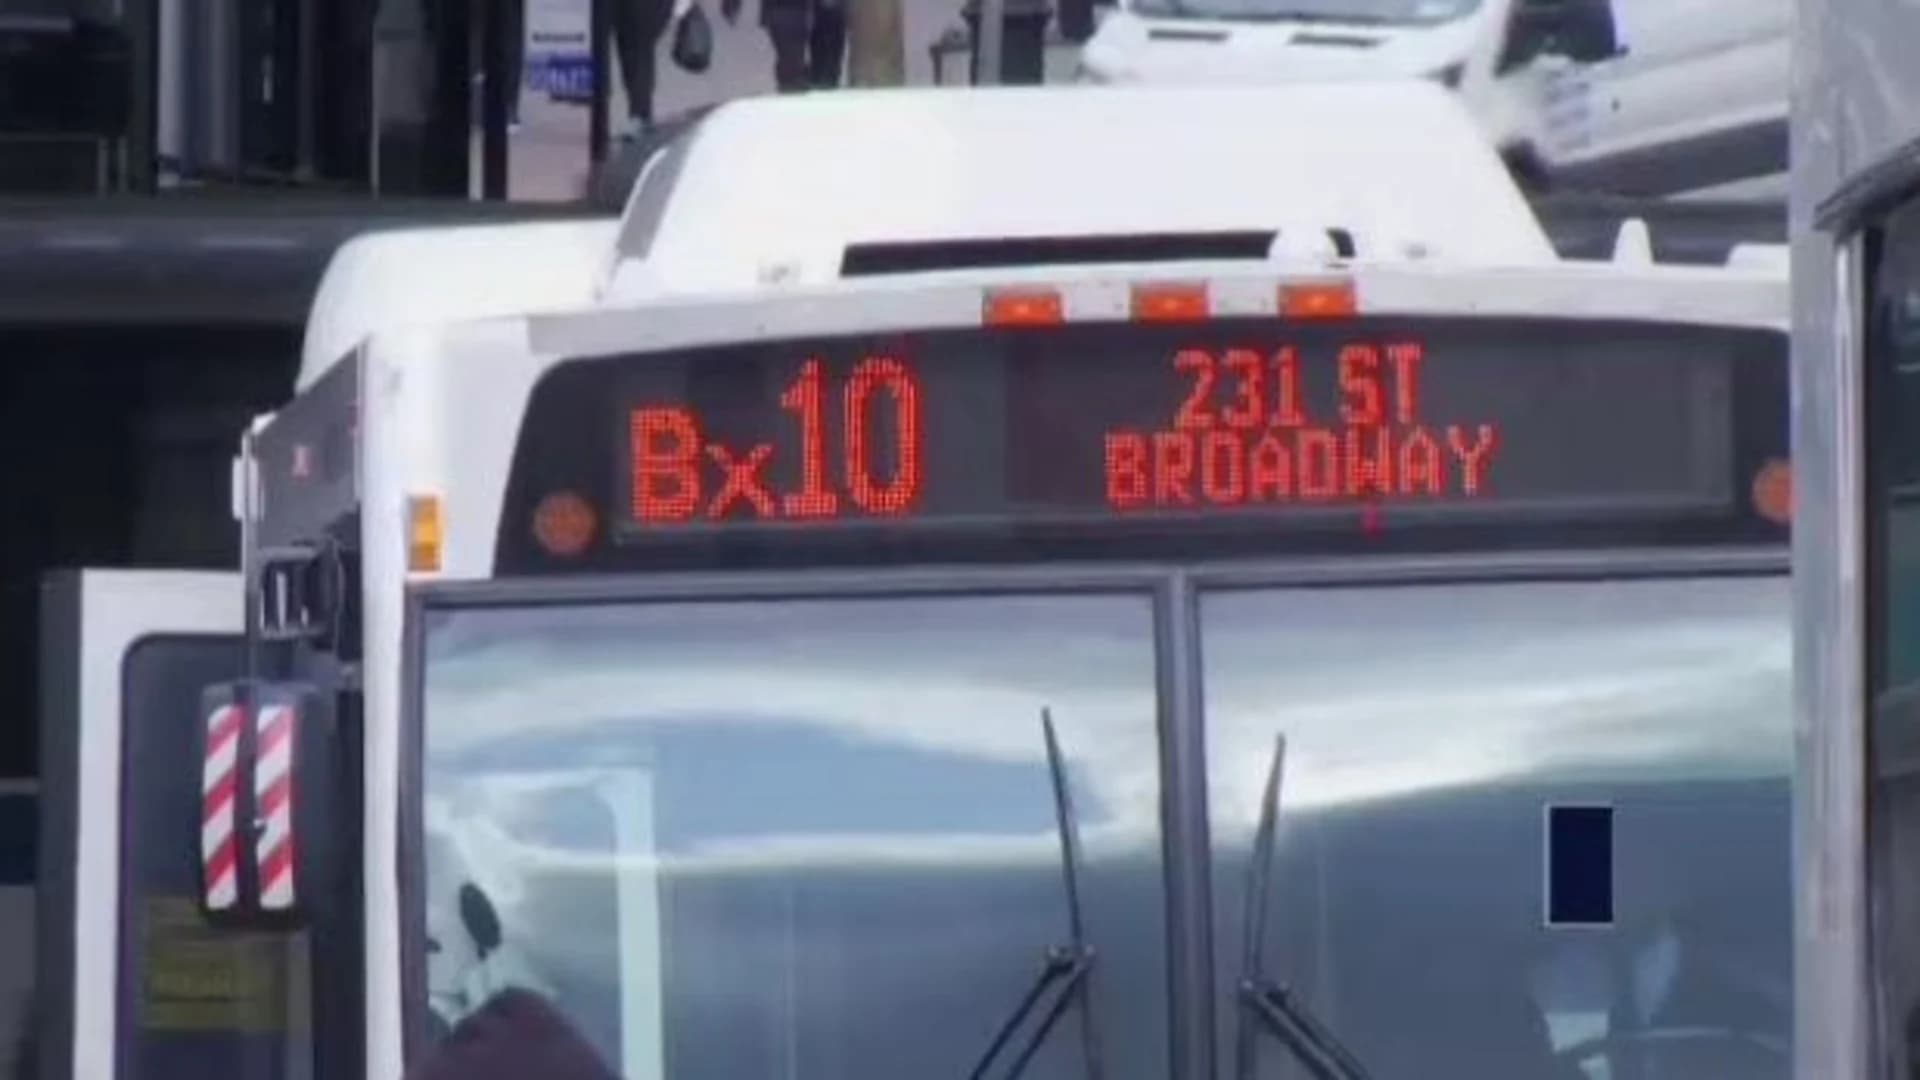 MTA increases service on Bx10 line after rider complaints